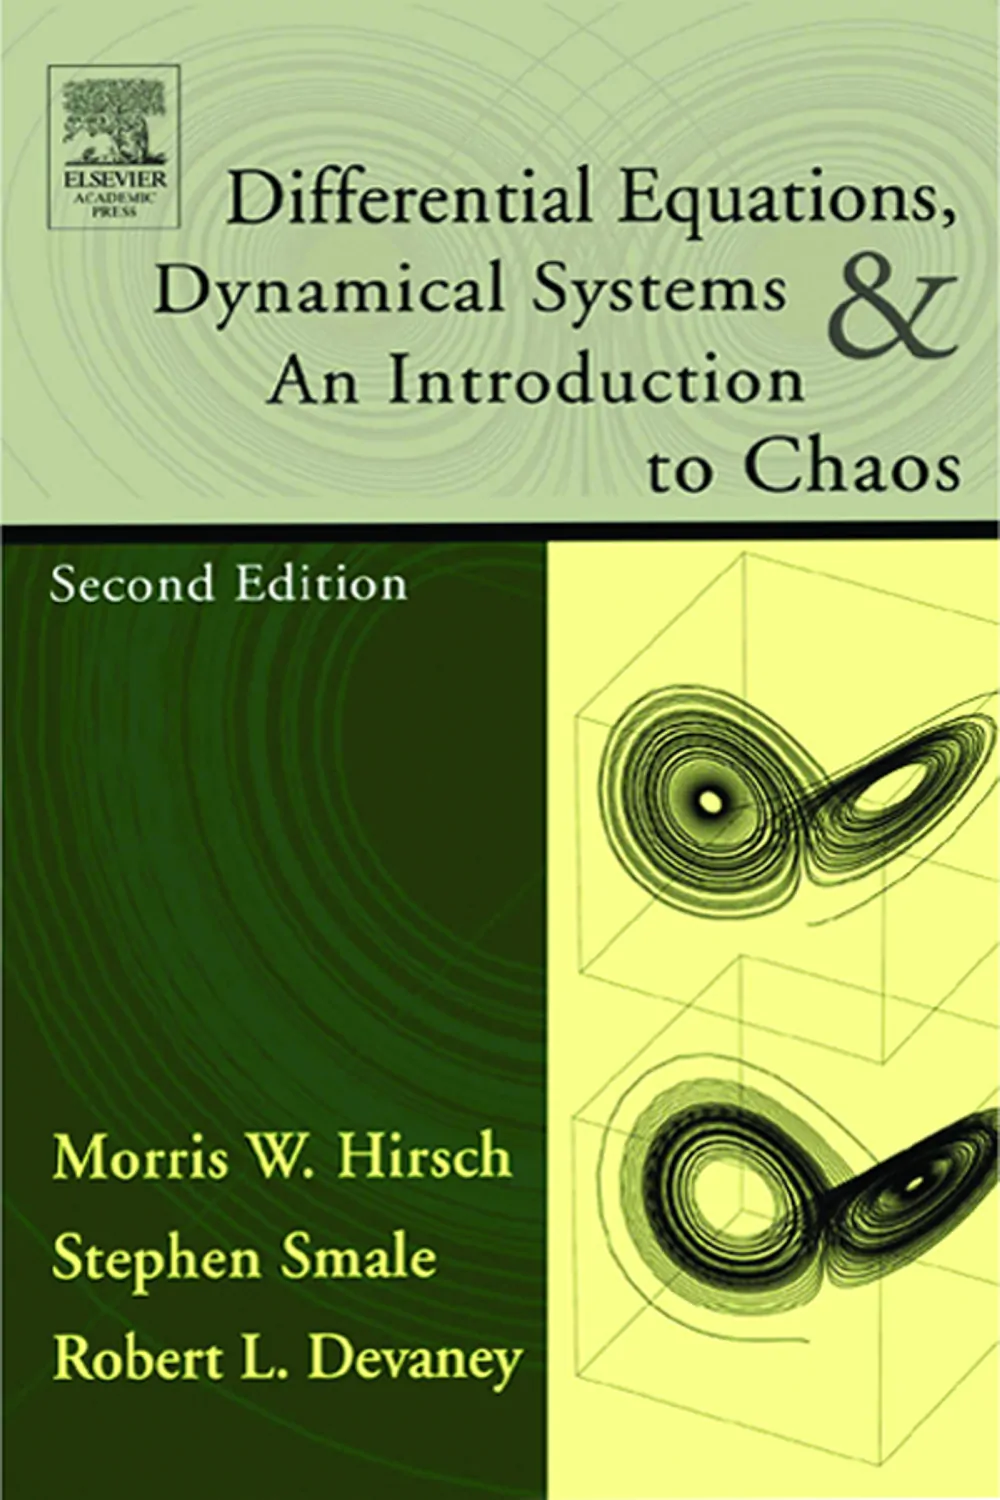 Differential Equations, Dynamical Systems And An Introduction to Chaos